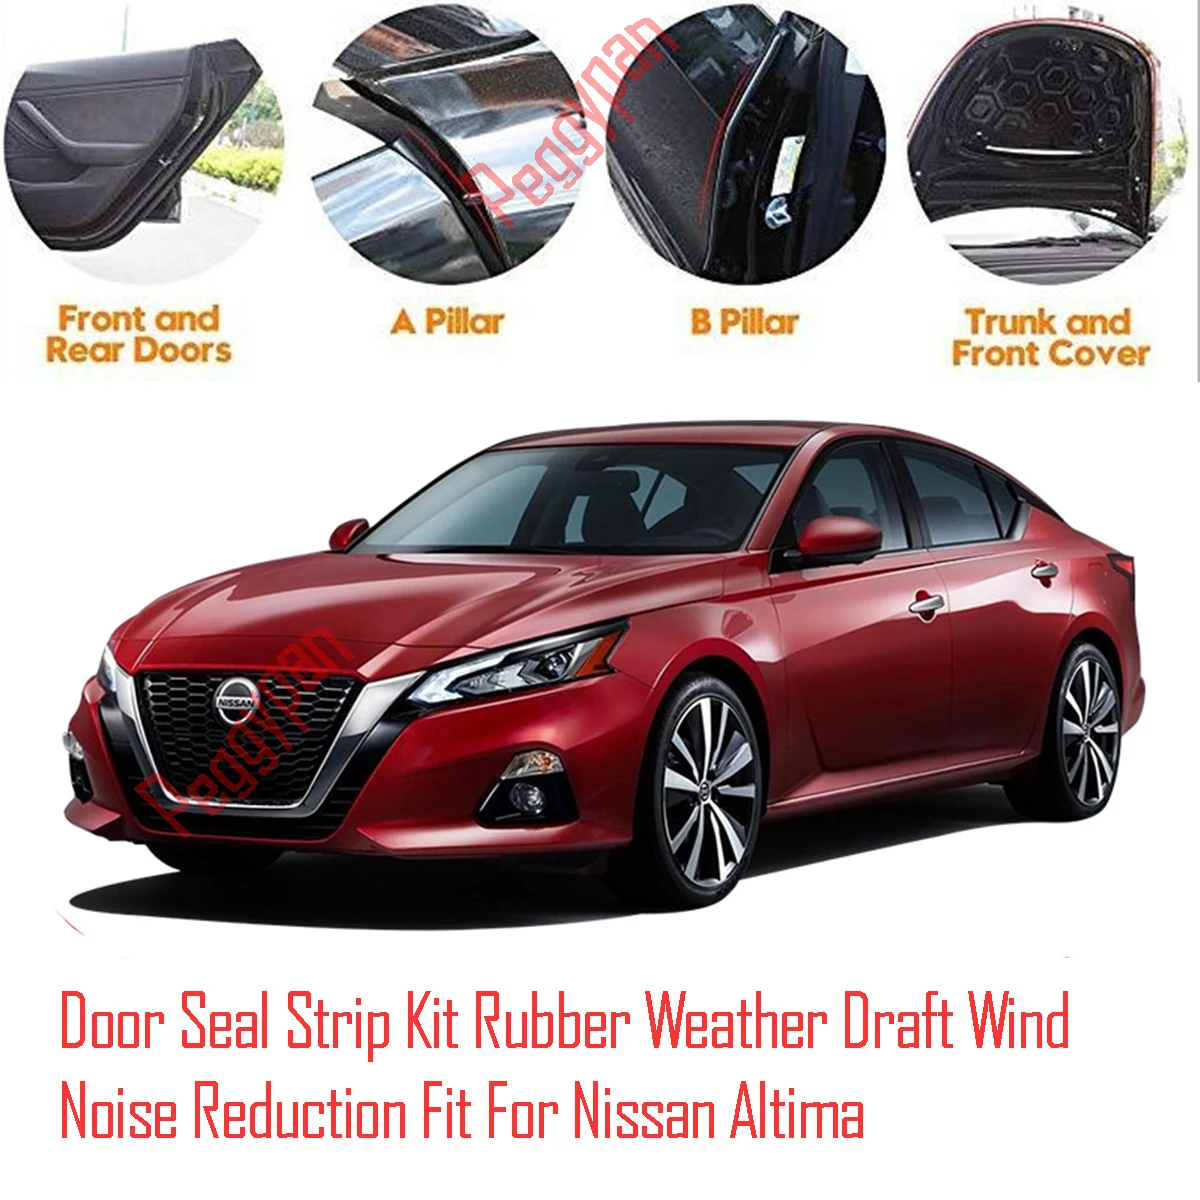 Door Seal Strip Kit Self Adhesive Window Engine Cover Soundproof Rubber Weather Draft Wind Noise Reduction Fit For Nissan Altima